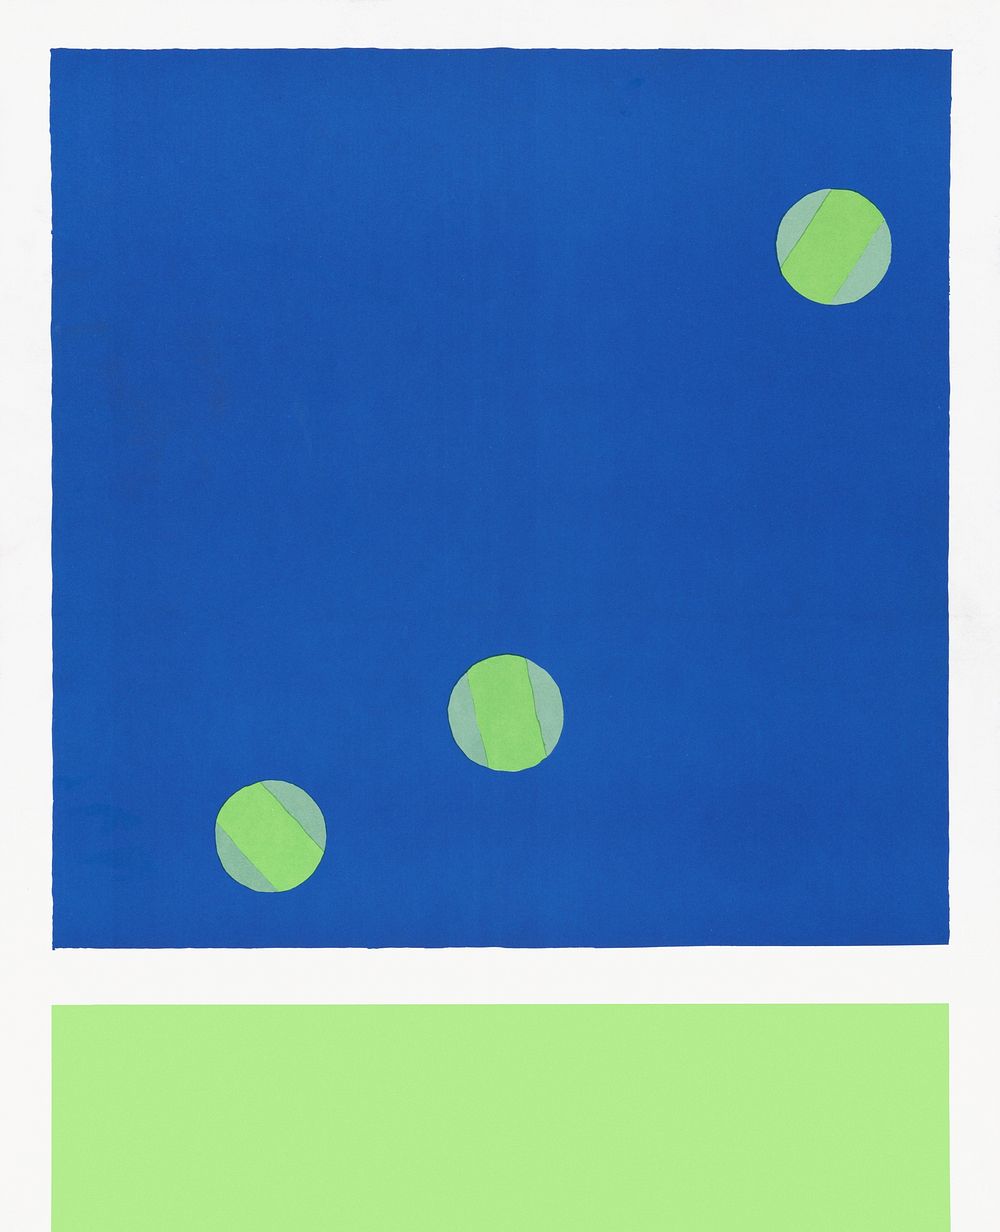 Abstract tennis balls in blue court illustration.  Remixed by rawpixel.